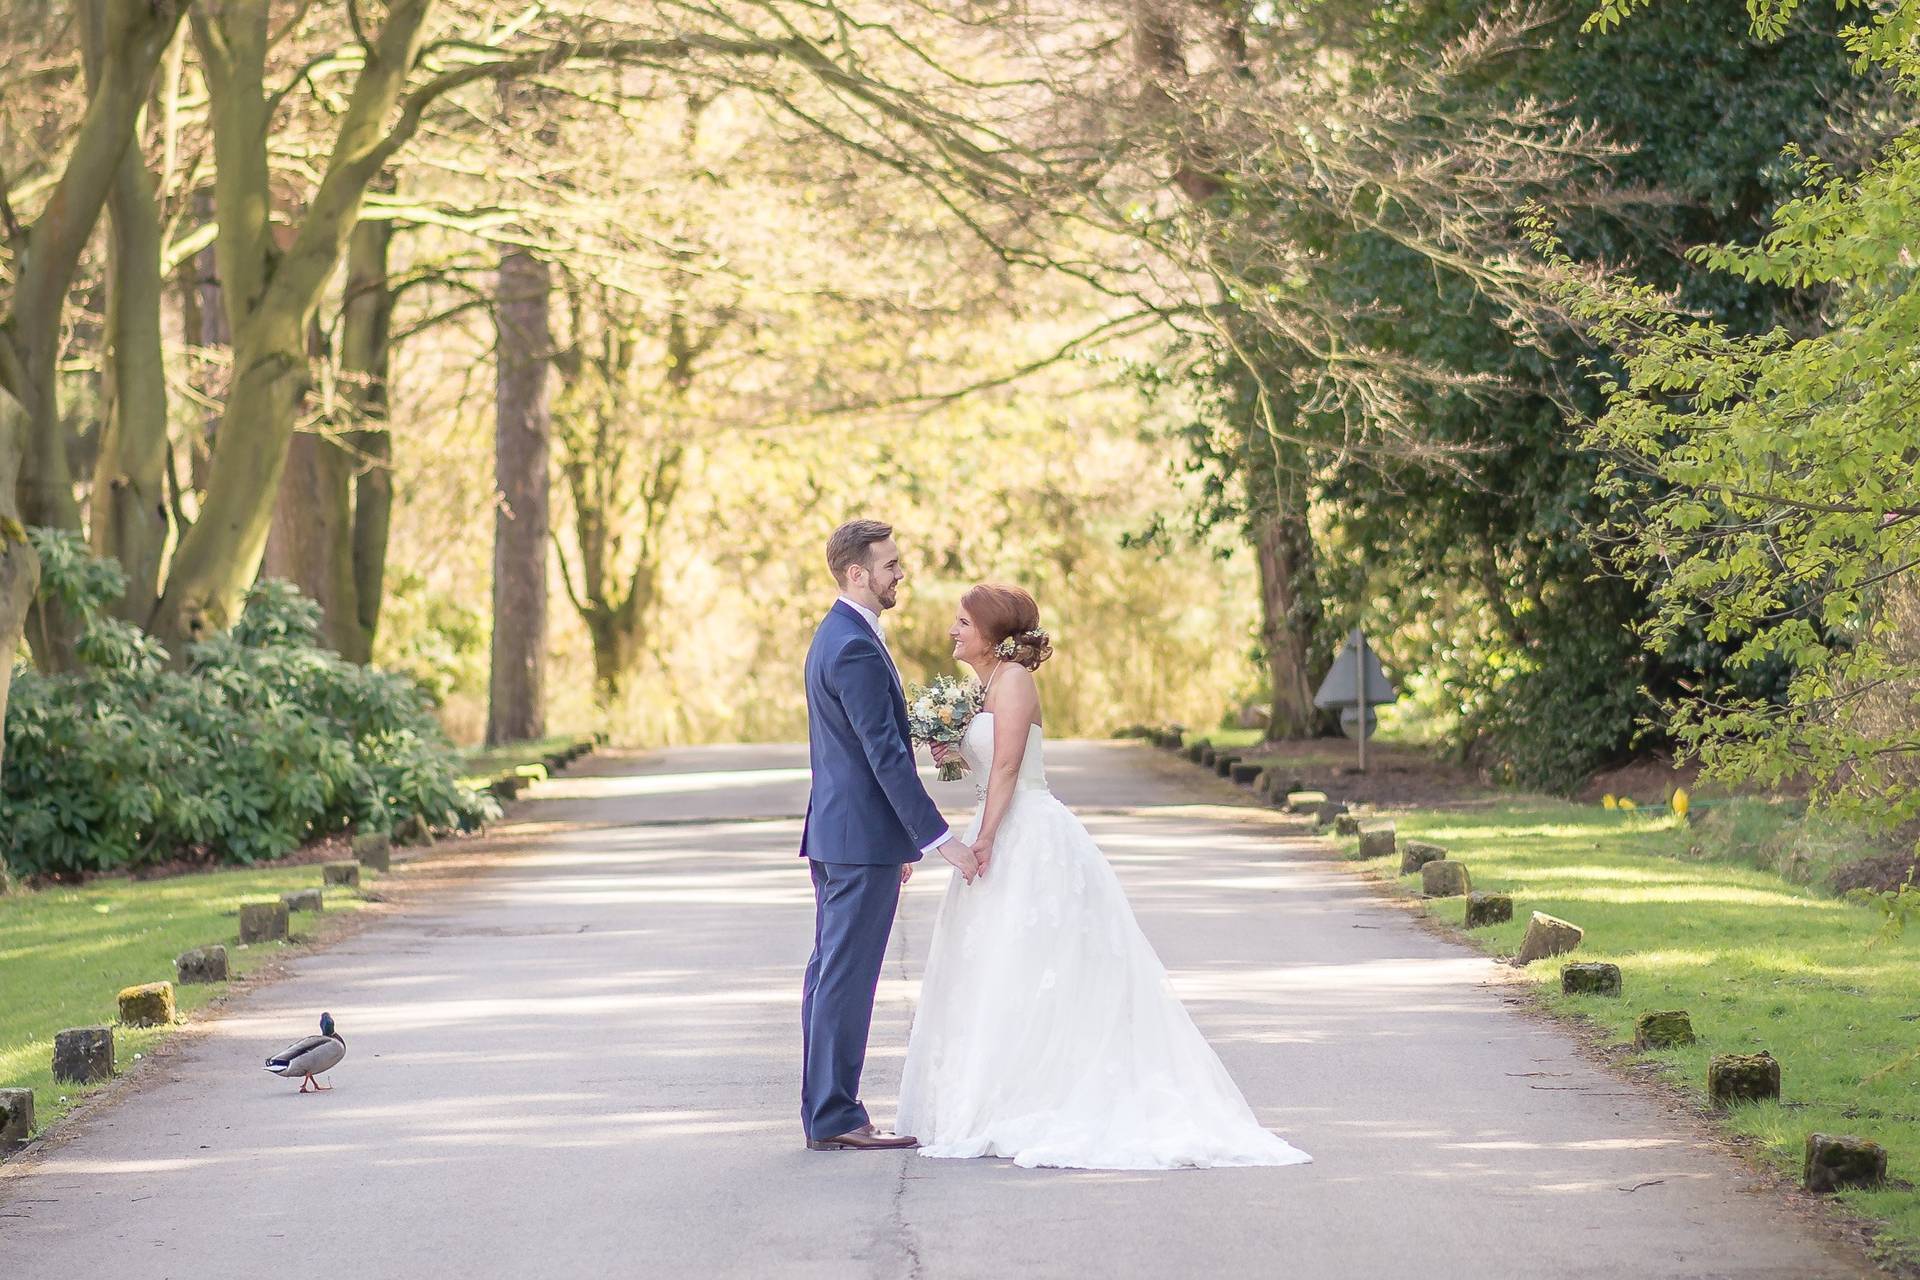 Whirlowbrook Hall Wedding Venue Sheffield, South Yorkshire | hitched.co.uk